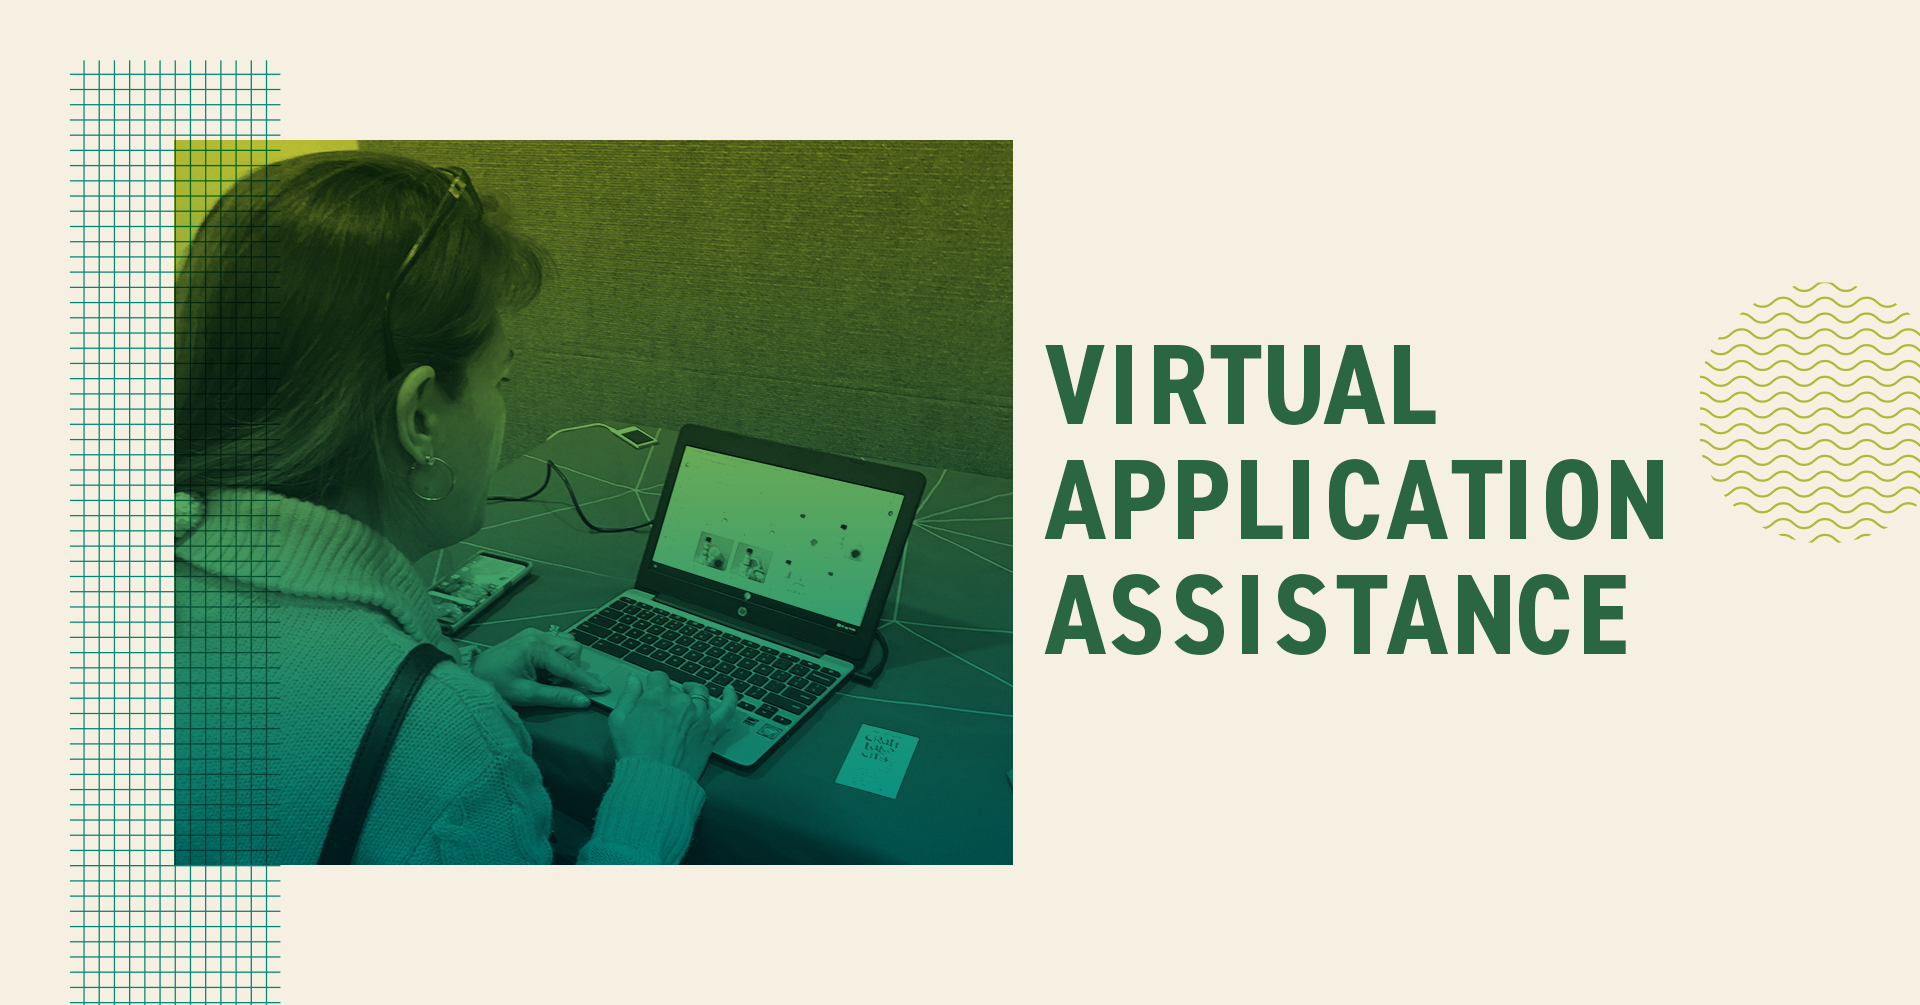 Craft Lake City® Offering a Virtual Application Assistance Day for the Virtual 12th Annual Craft Lake City DIY Festival® Presented By Harmons